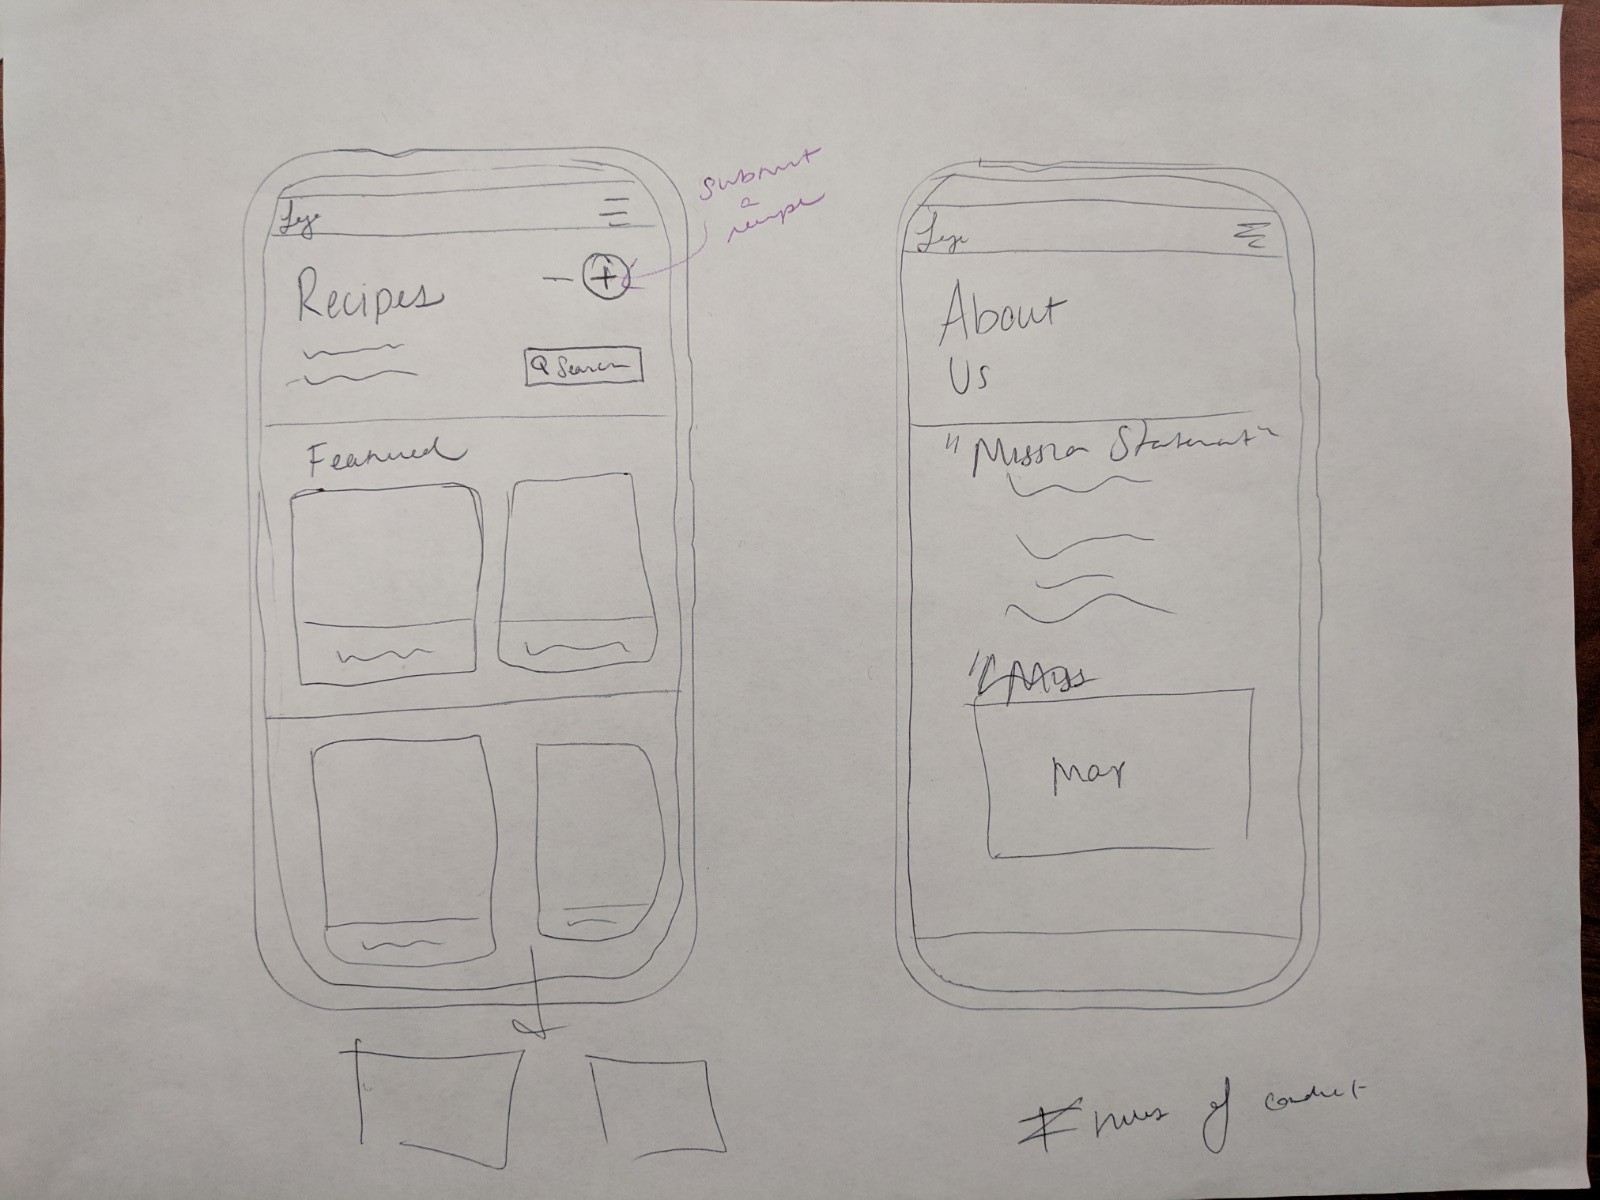 sketches of recipe and about page for mobile screen size